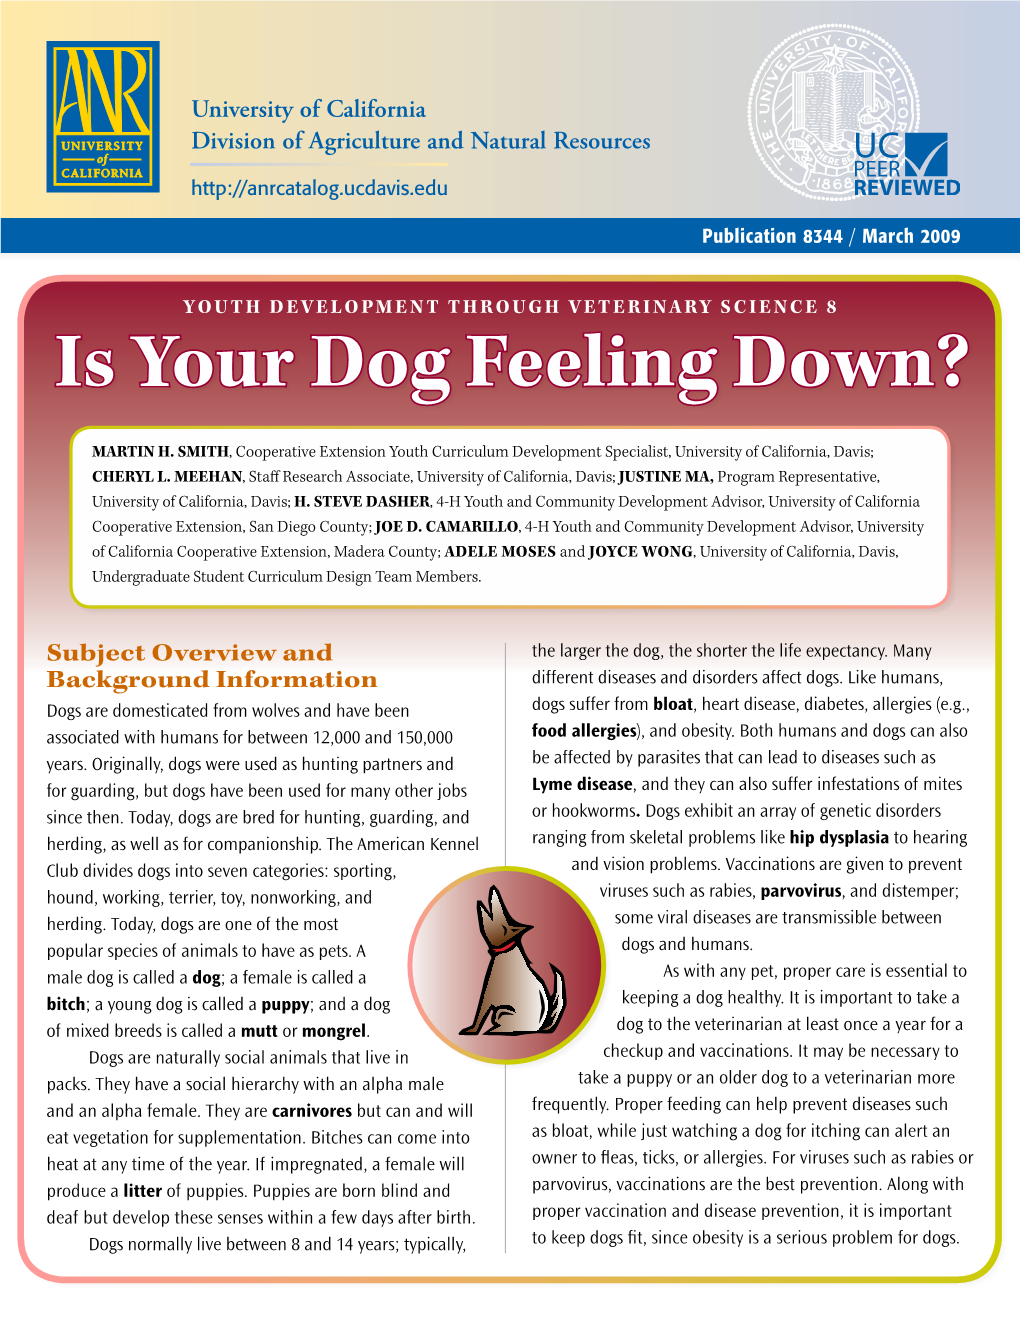 Is Your Dog Feeling Down?